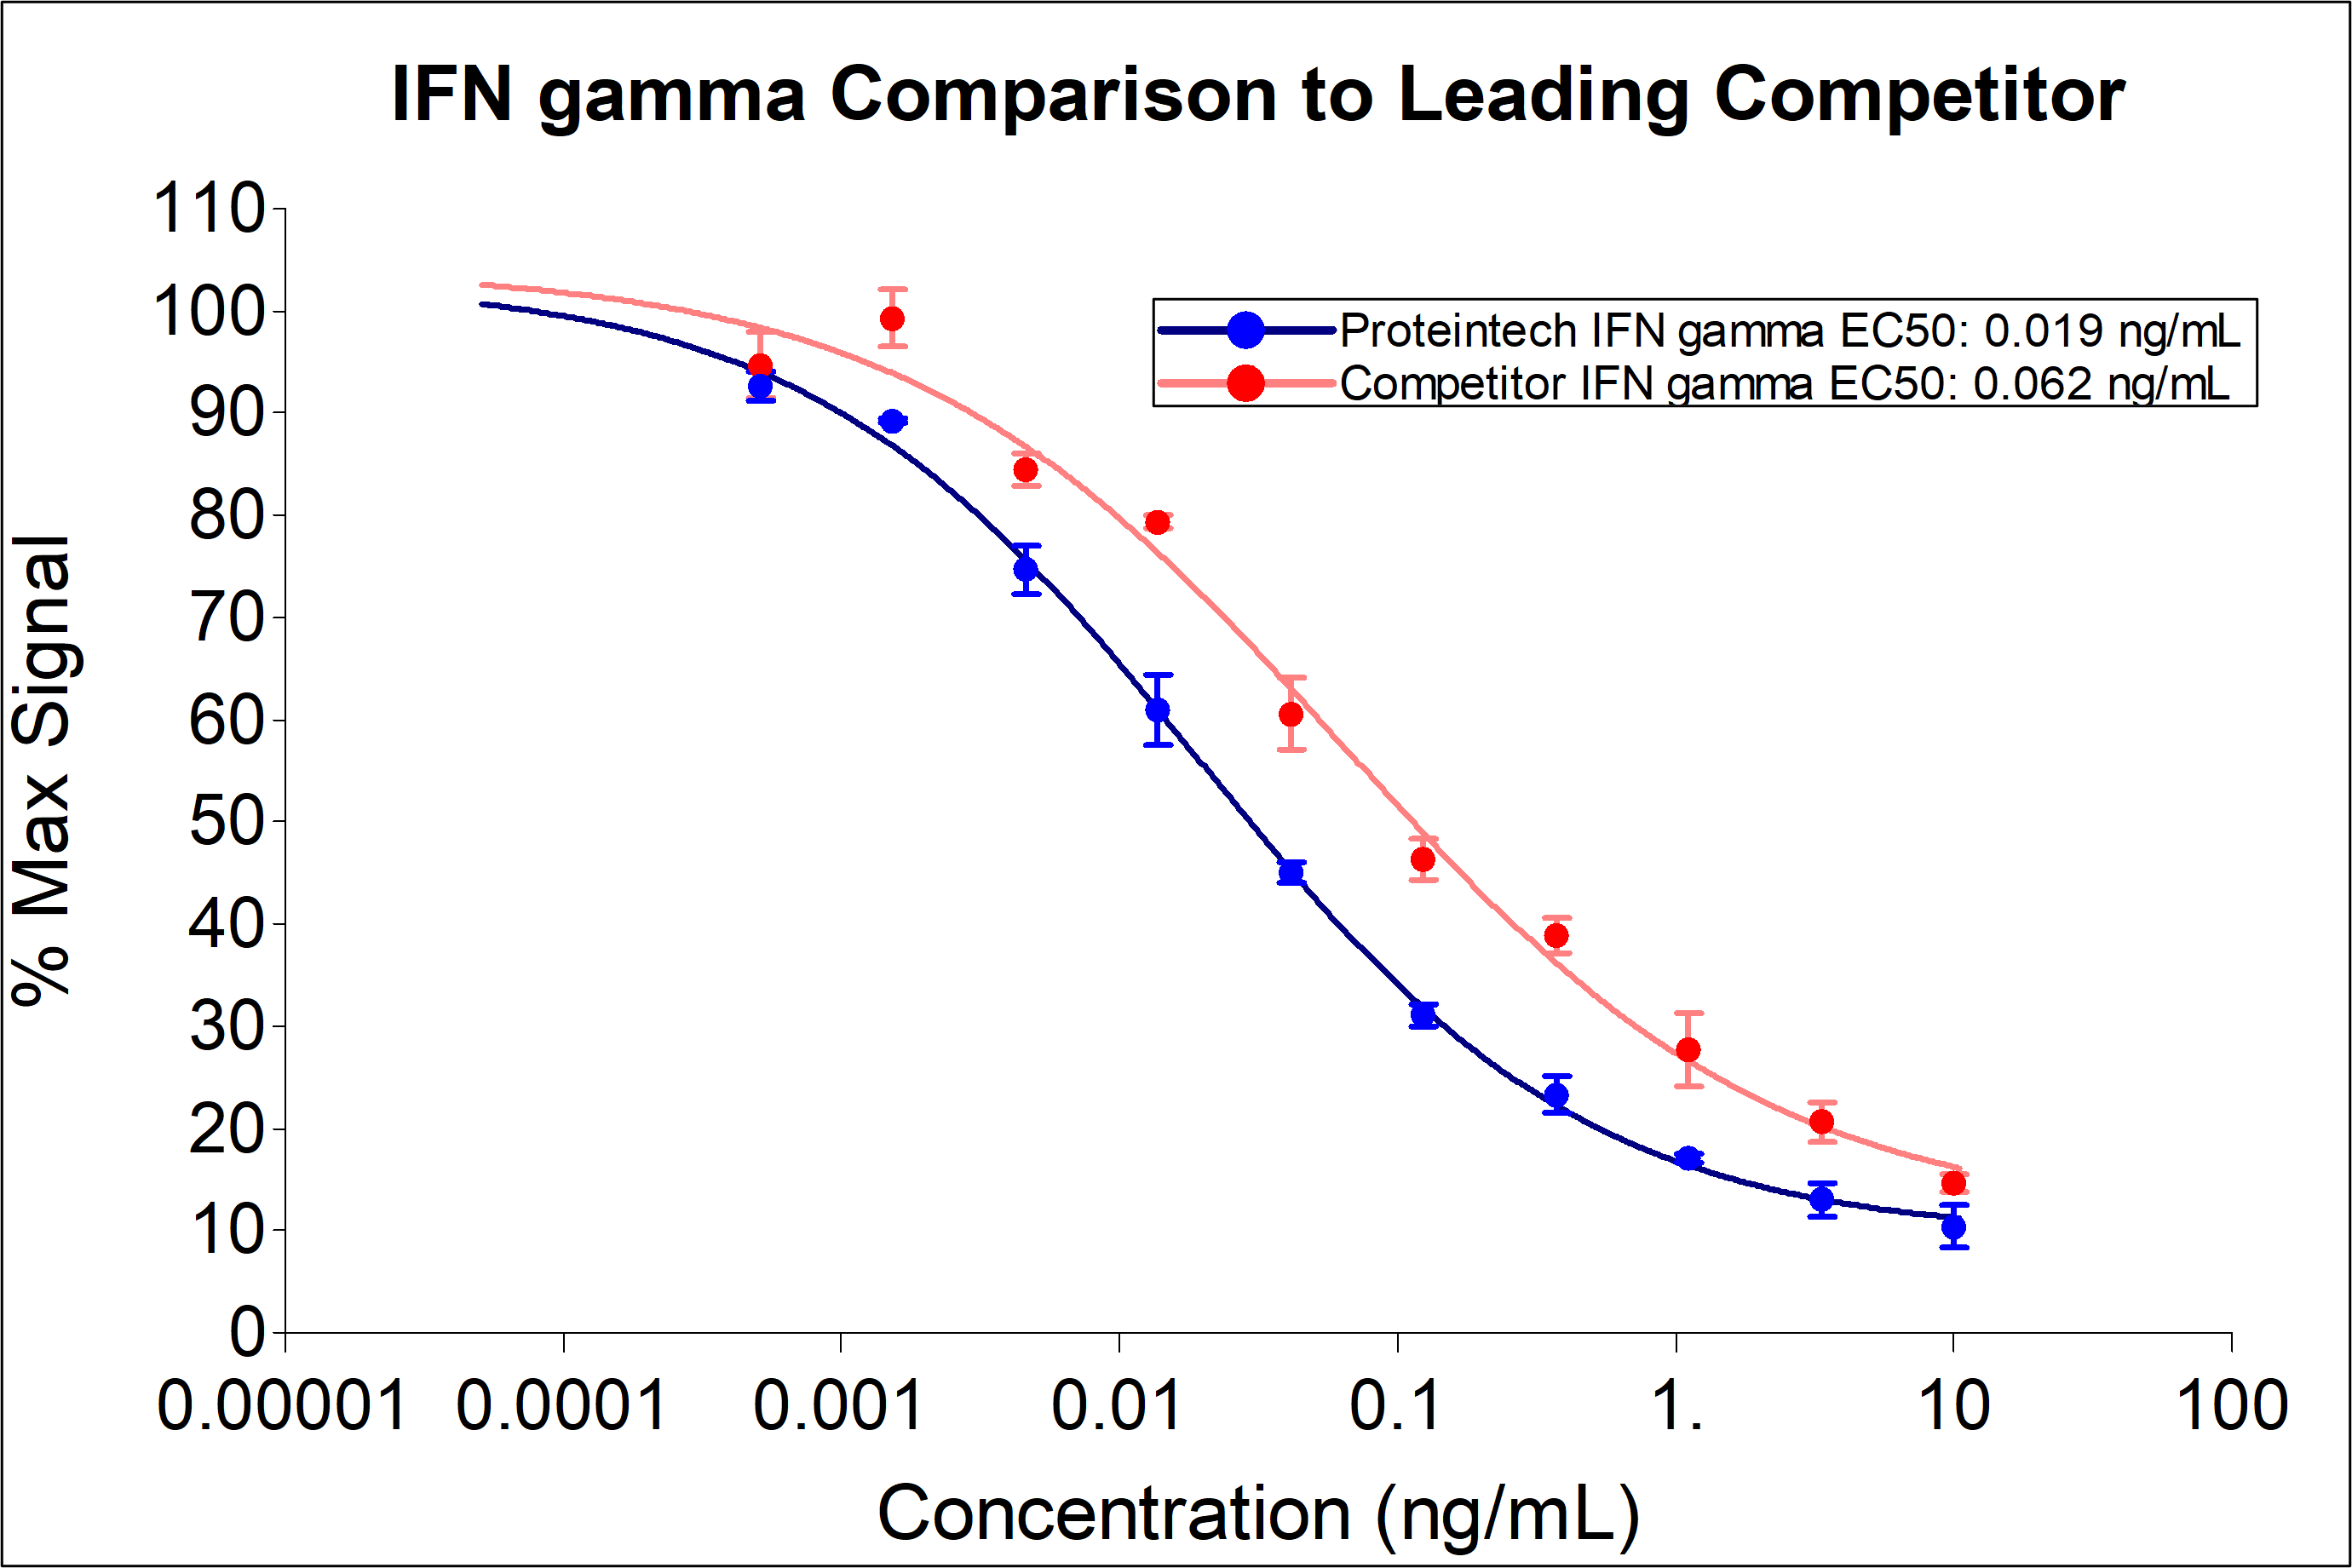 Proteintech IFN gamma (HZ-1301) demonstrates a 3-fold lower EC50 and equivalent dose-dependent inhibition of proliferation to a leading competitor. Recombinant human IFN gamma dose-dependently inhibits proliferation of the HT-29 human colorectal adenocarcinoma cell line. Cell number was quantitatively assessed by PrestoBlue® cell viability reagent. HT-29 cells were treated with increasing concentrations of  recombinant IFN gamma for 72 hours. The EC50 was determined using a 4-parameter non-linear regression model.The EC50 range is 0.02-0.14 ng/mL.